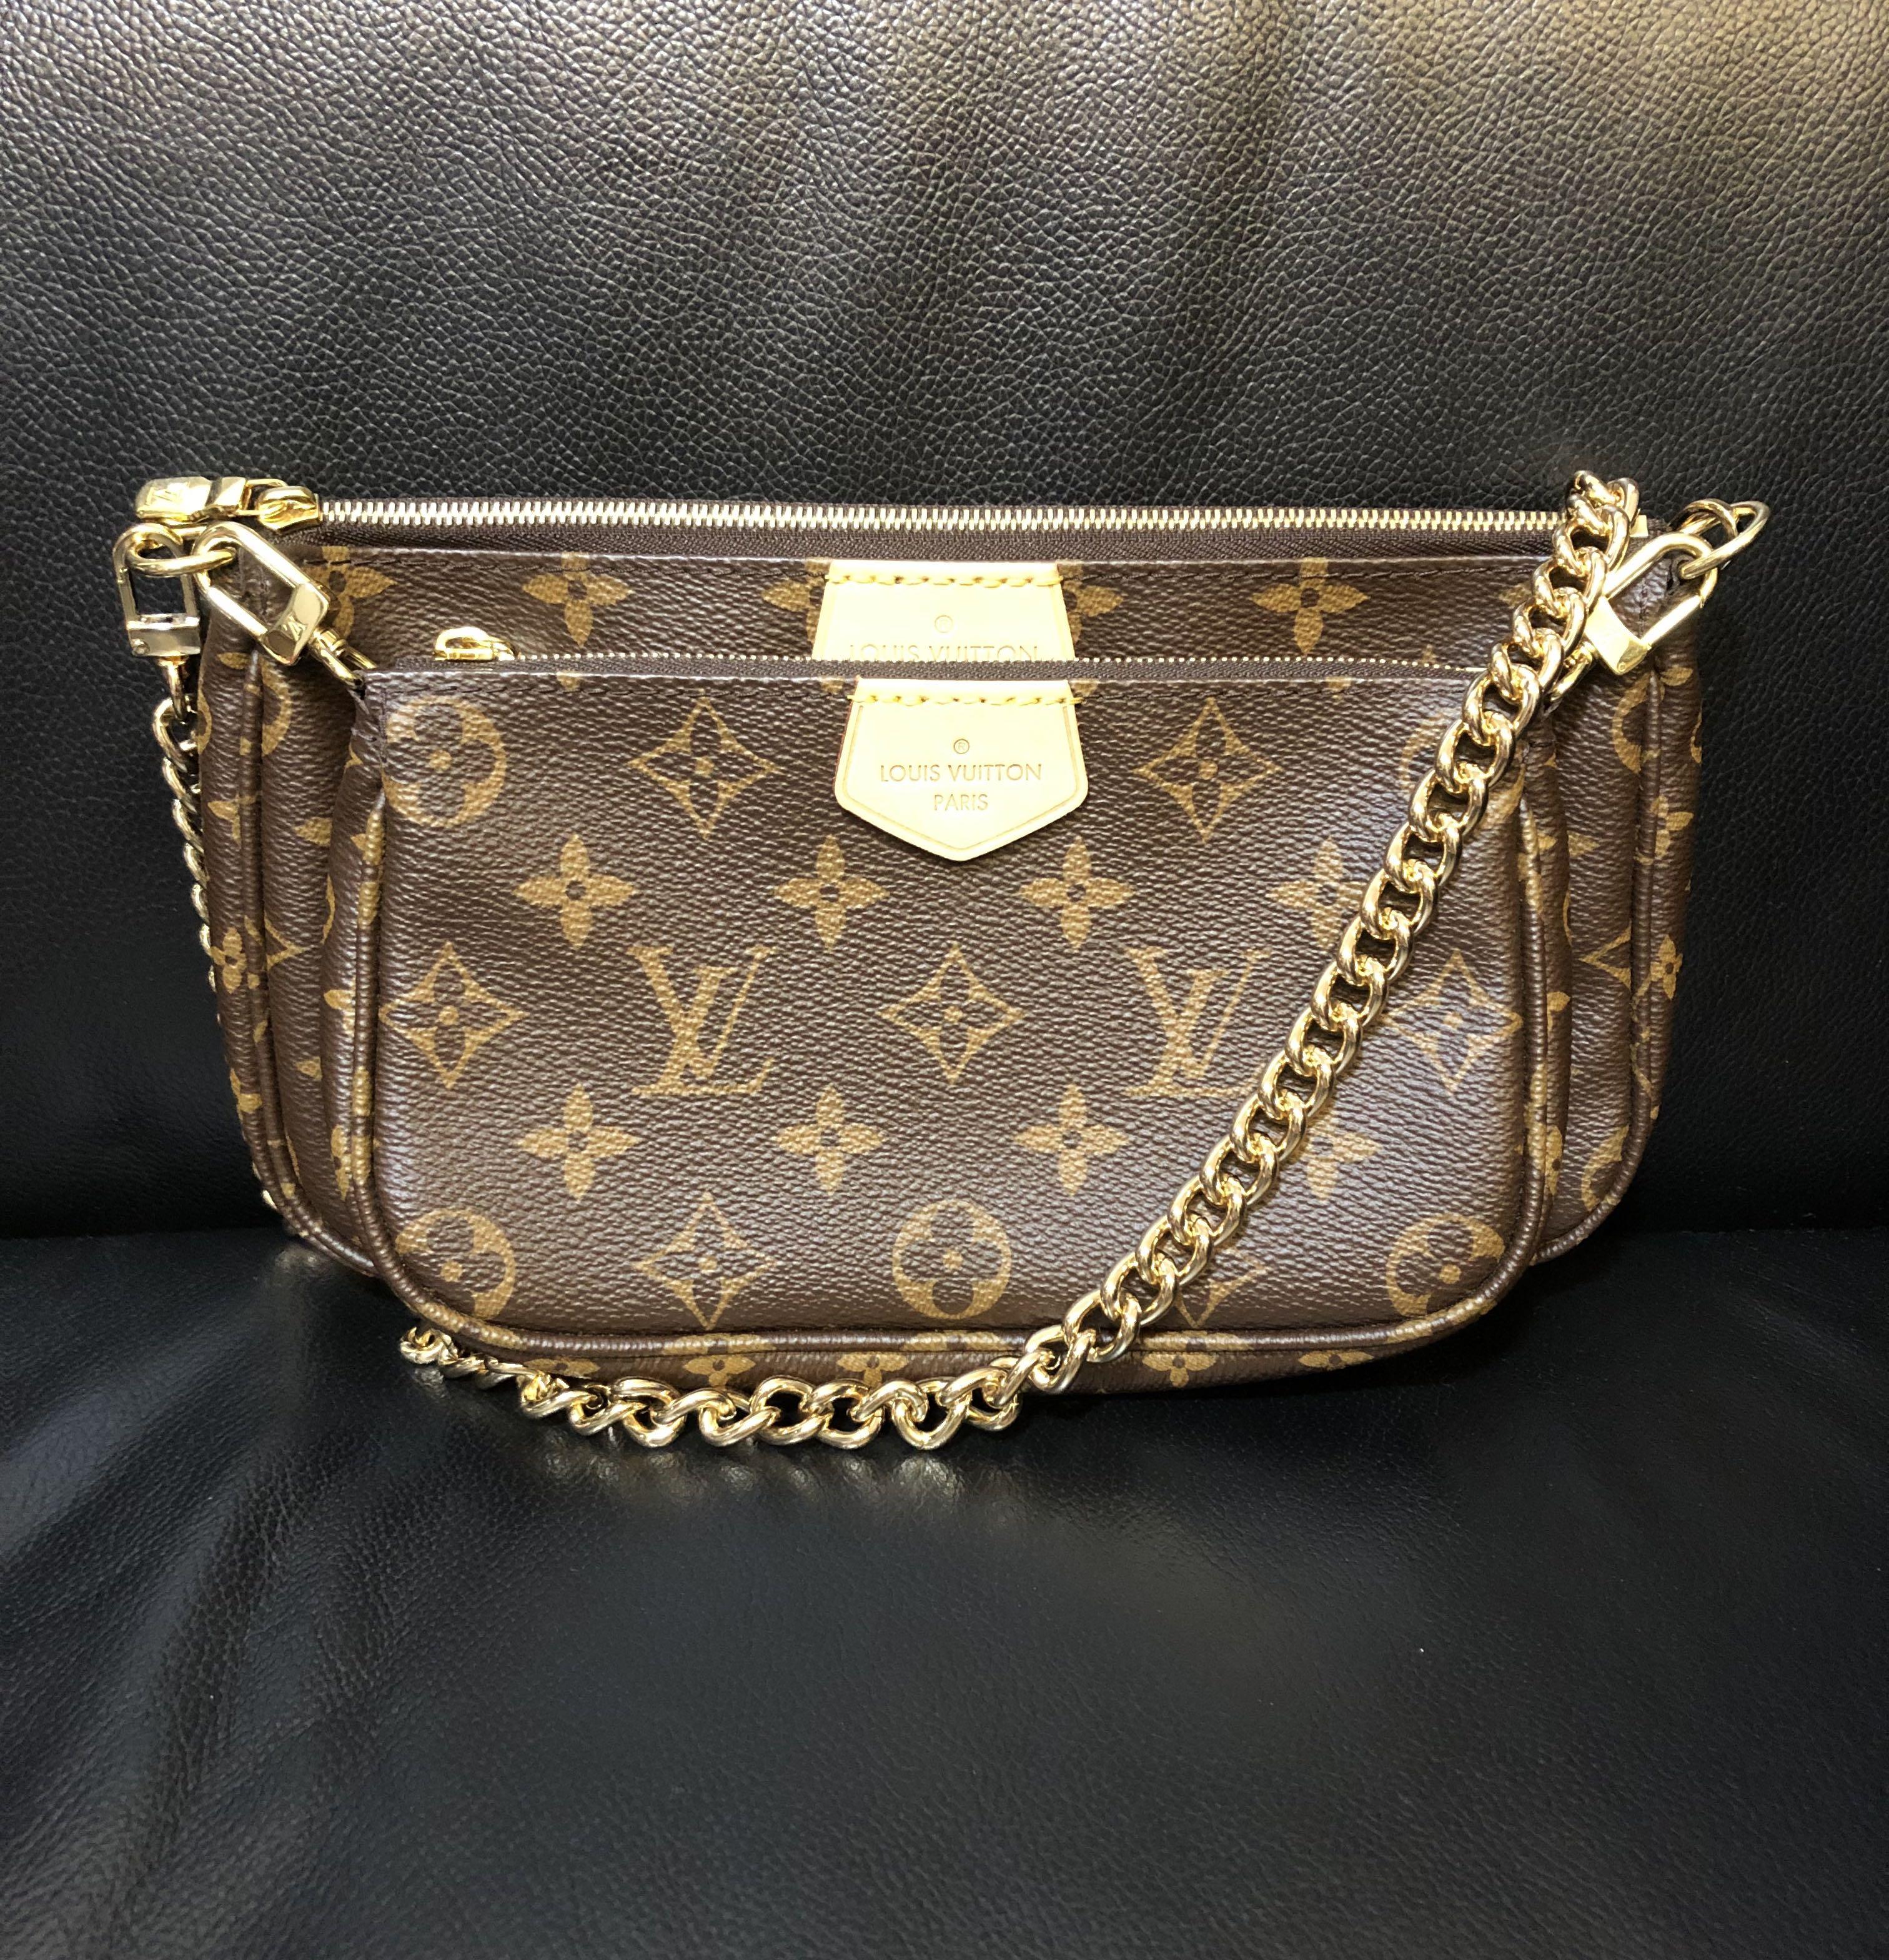 Gold bag chain strap (can be used for LV bags), Luxury